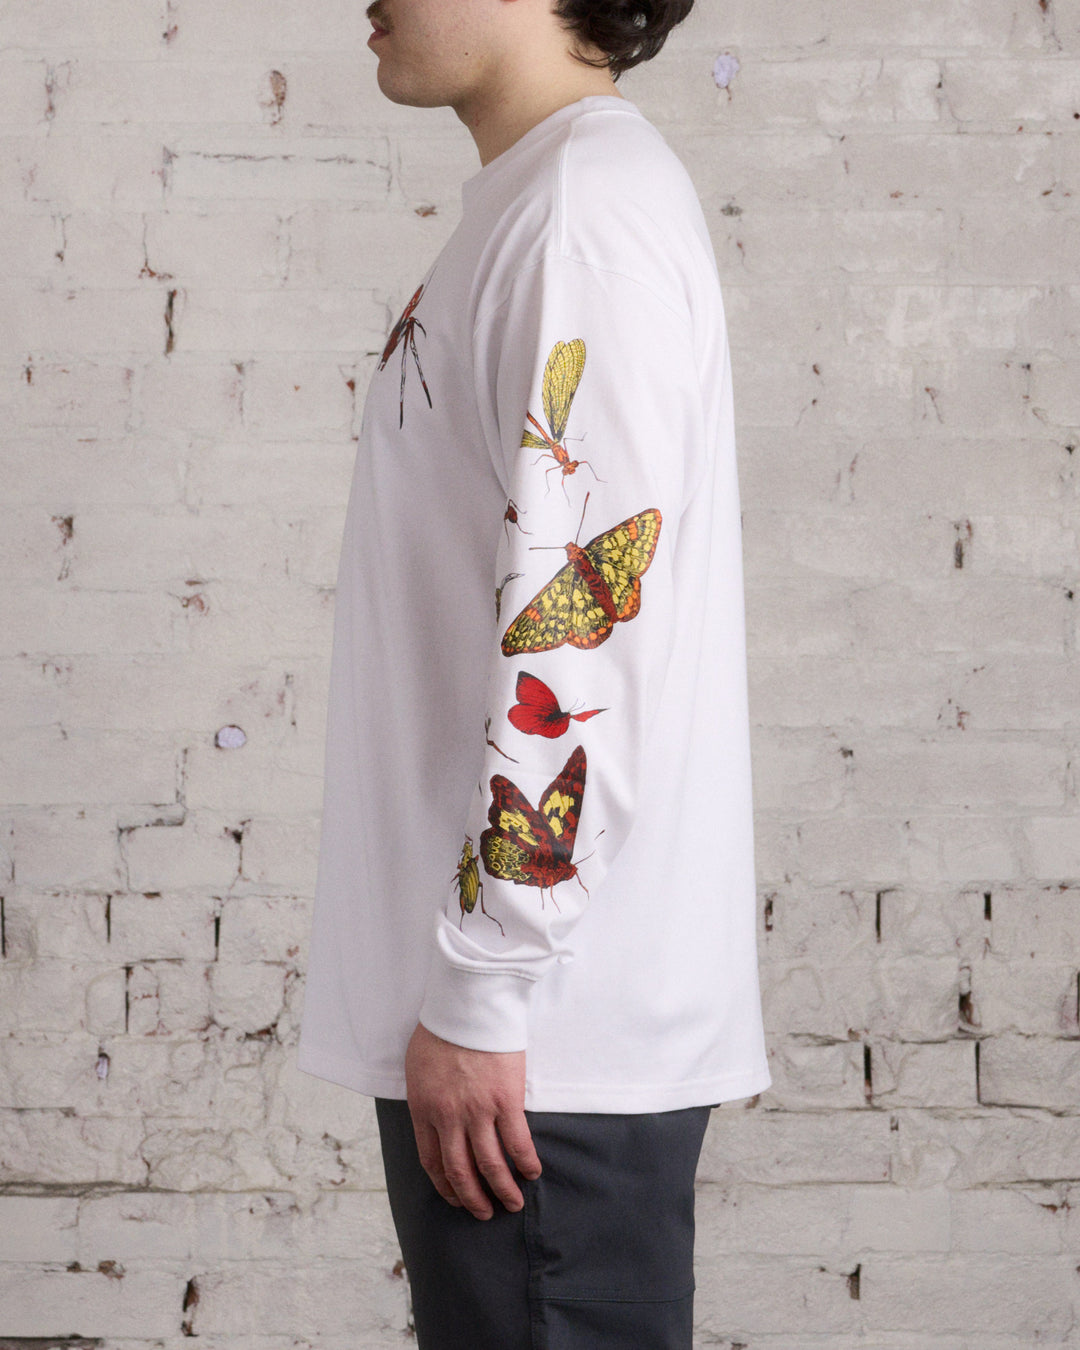 Nike ACG "Insects" Long Sleeve T-Shirt Summit White